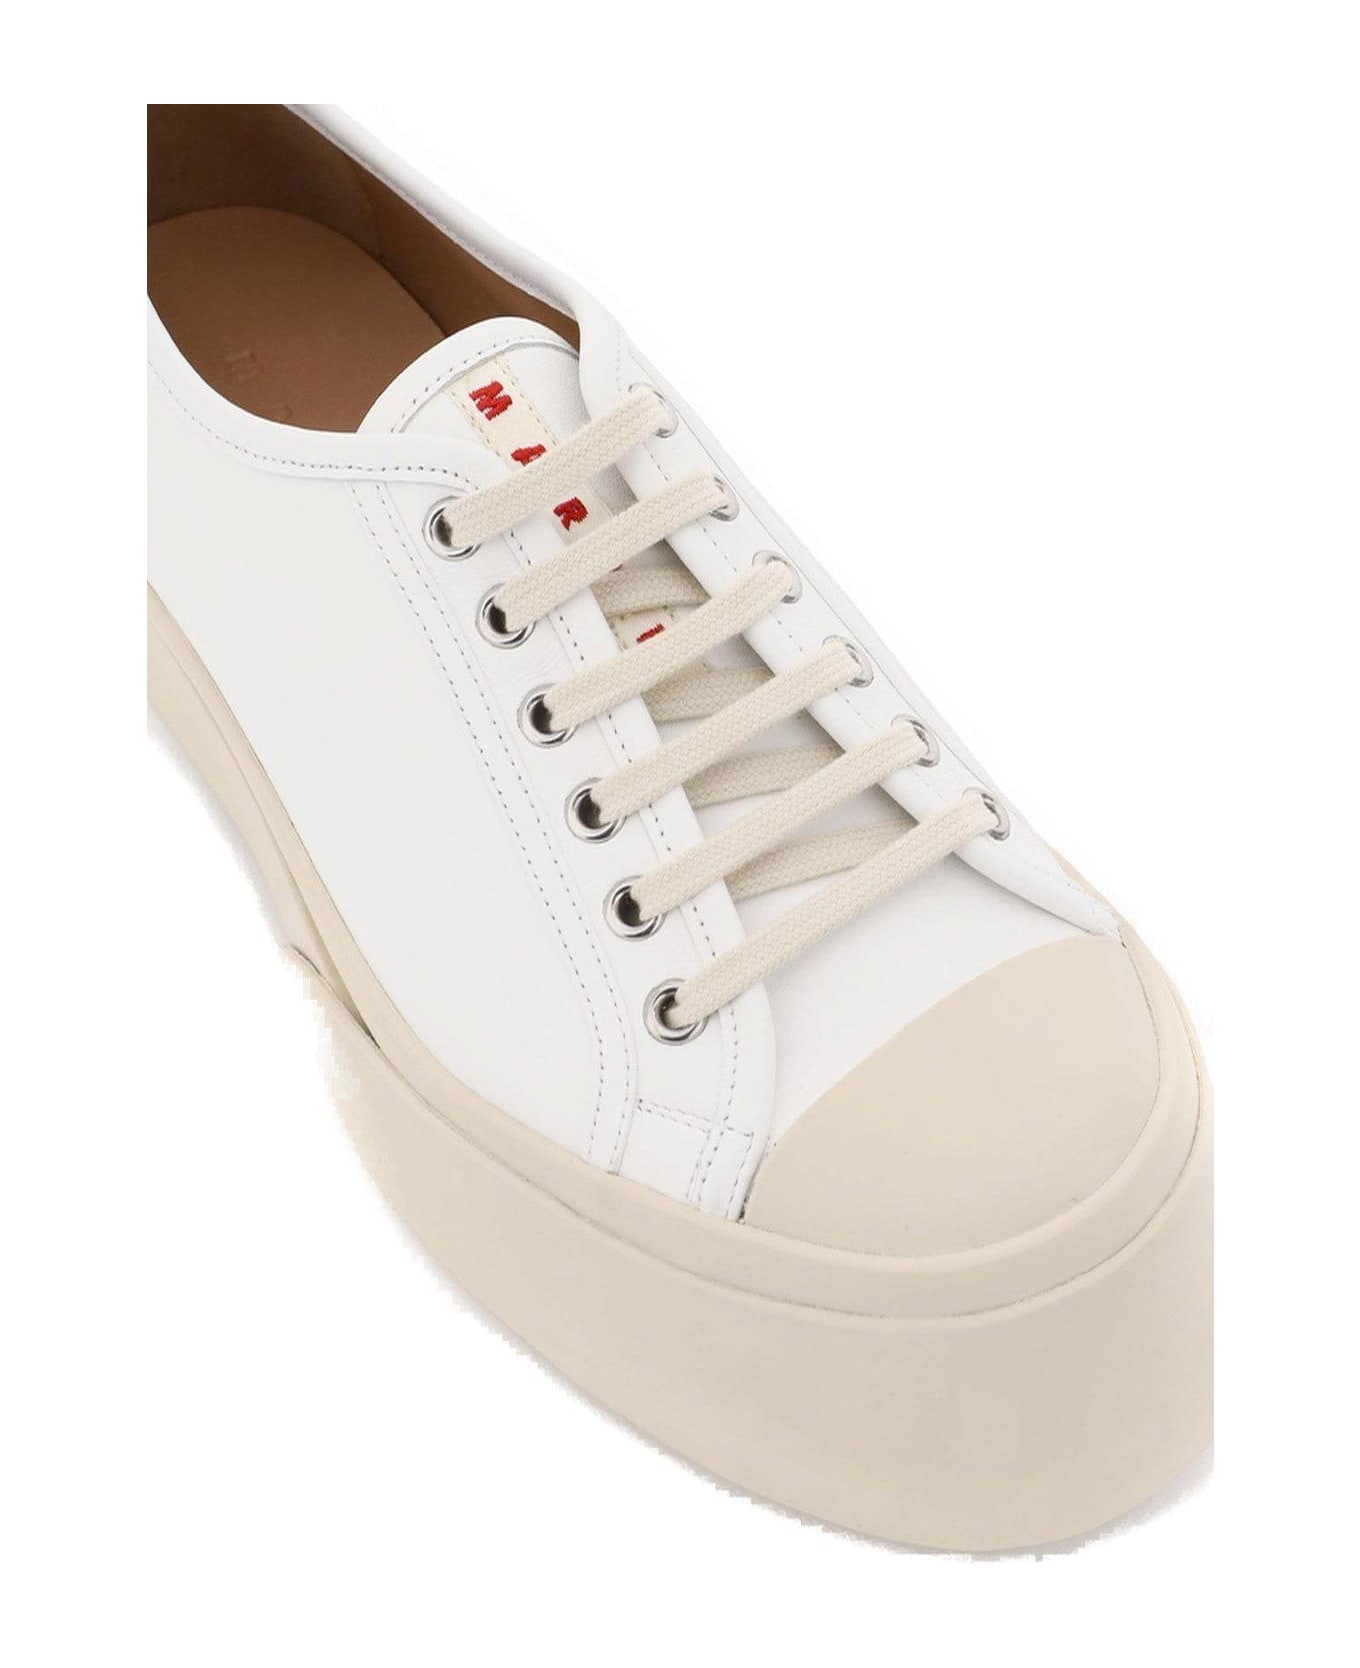 Marni Pablo Chunky Sole Sneakers - WHITE